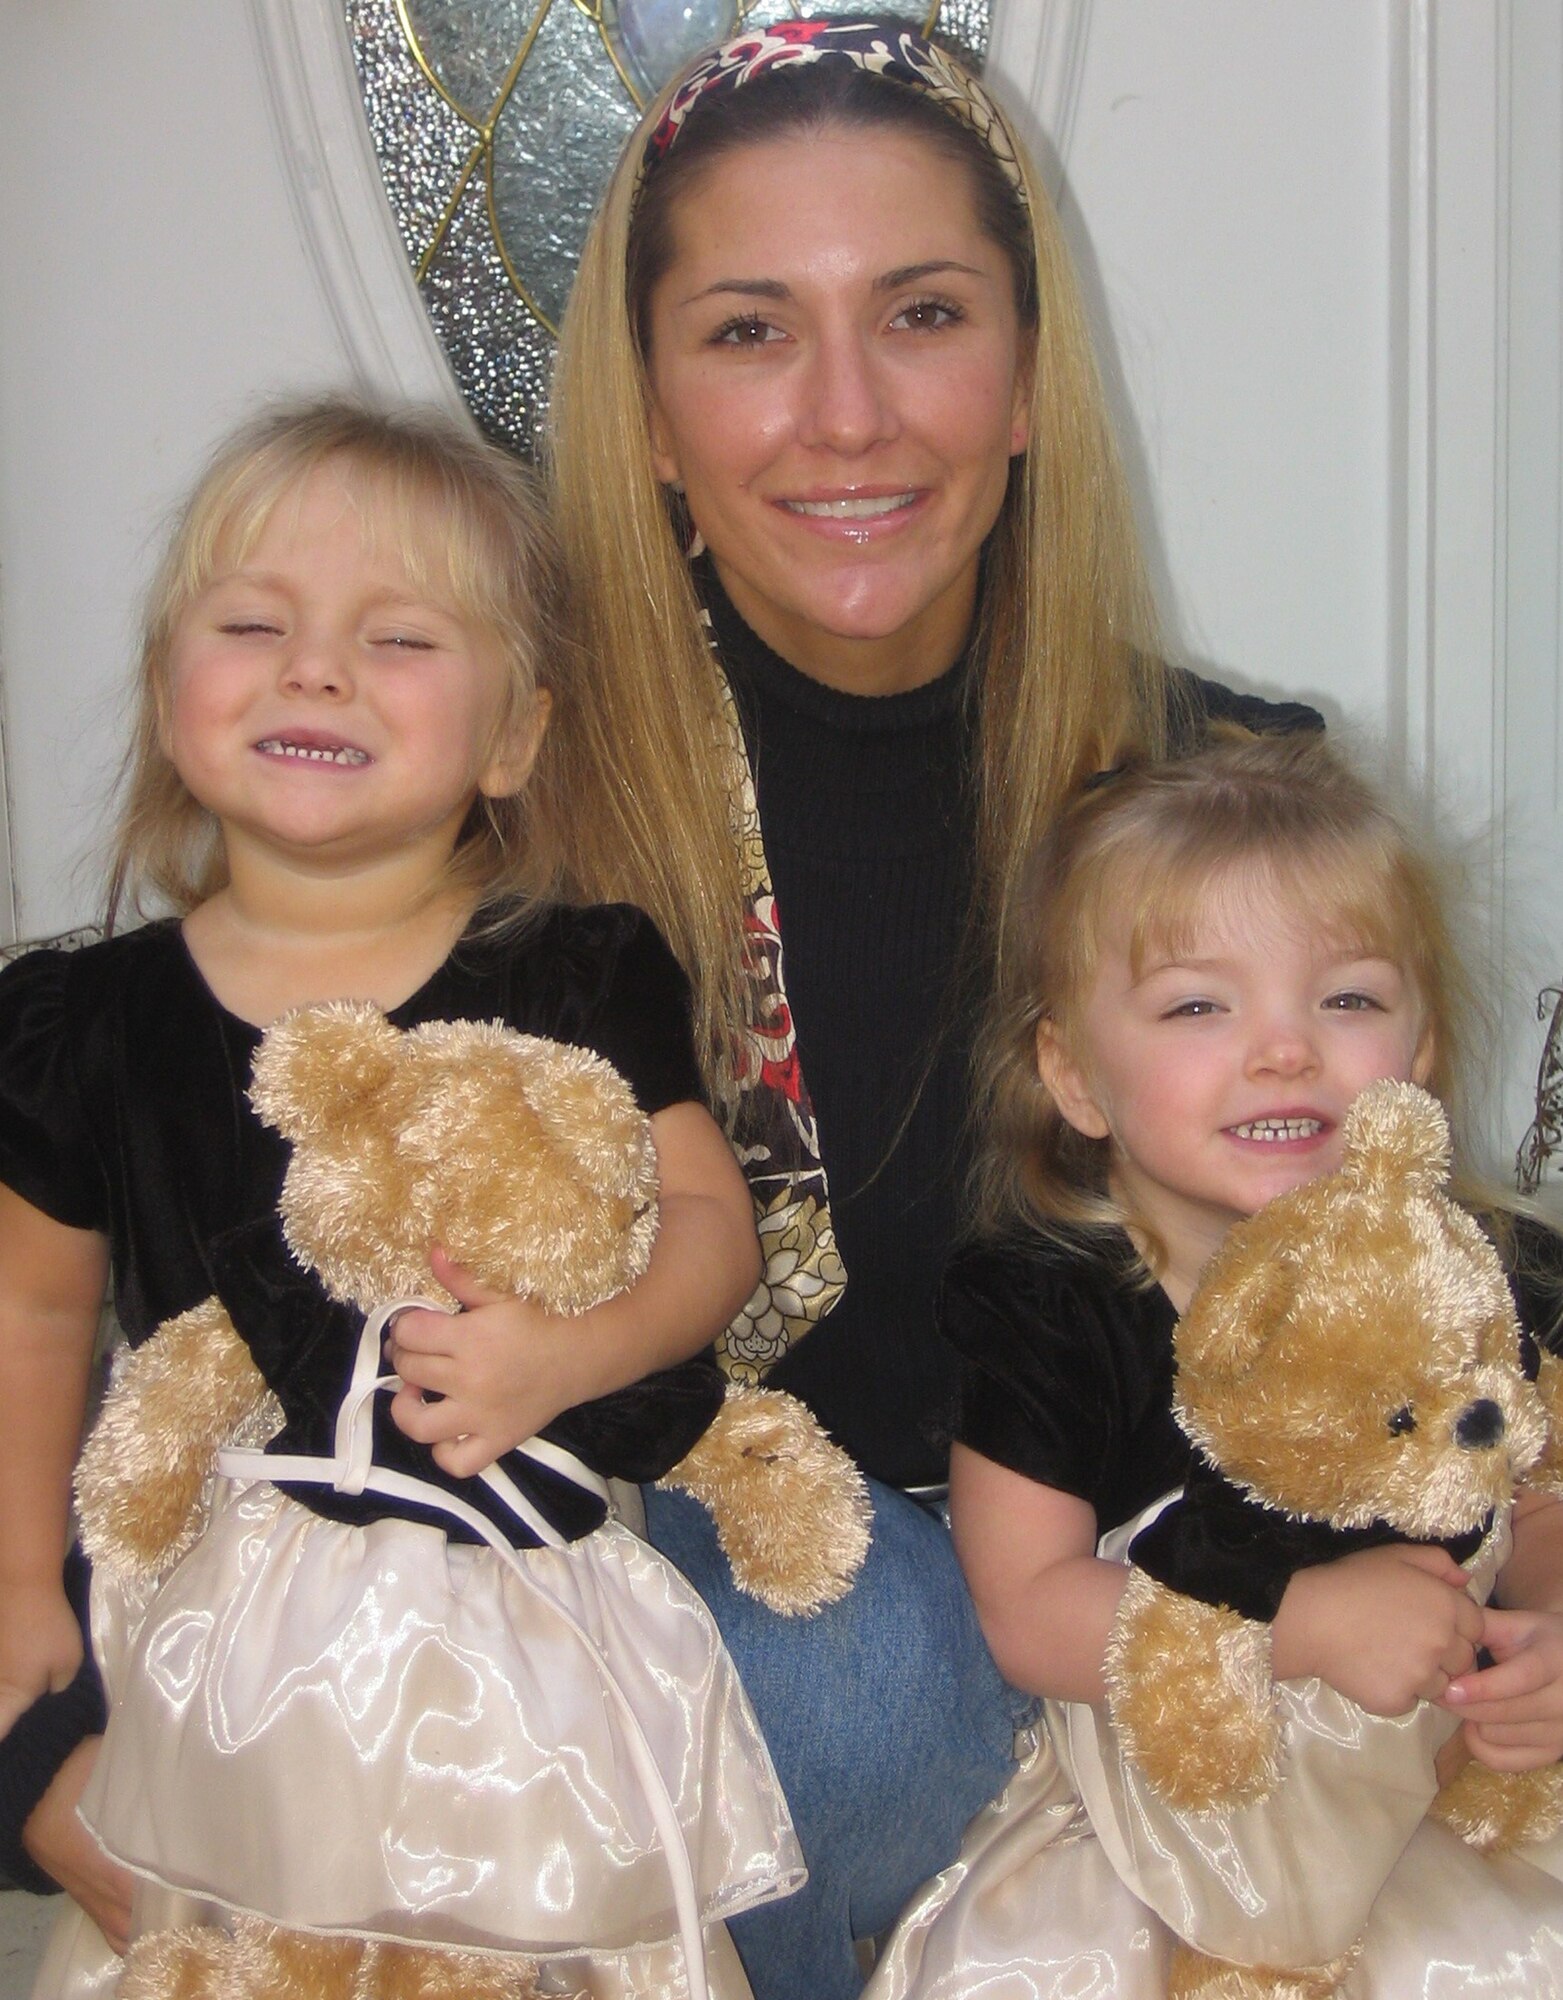 Senior Master Sgt. Jennifer Burg and her 3-year-old twin daughters Maddy, left, and Kaylee, born premature at 31 weeks in January 2005, relax at their Manassas, Va., home. Working closely with the March of Dimes in connection with the pursuit of her first Ironman at the Ford Ironman Louisville (Ky.) Aug. 31, Sergeant Burg has embarked on her own fundraising campaign to help battle birth defects, premature birth and infant mortality. (Photo courtesy of Senior Master Sgt. Jennifer Burg.) 